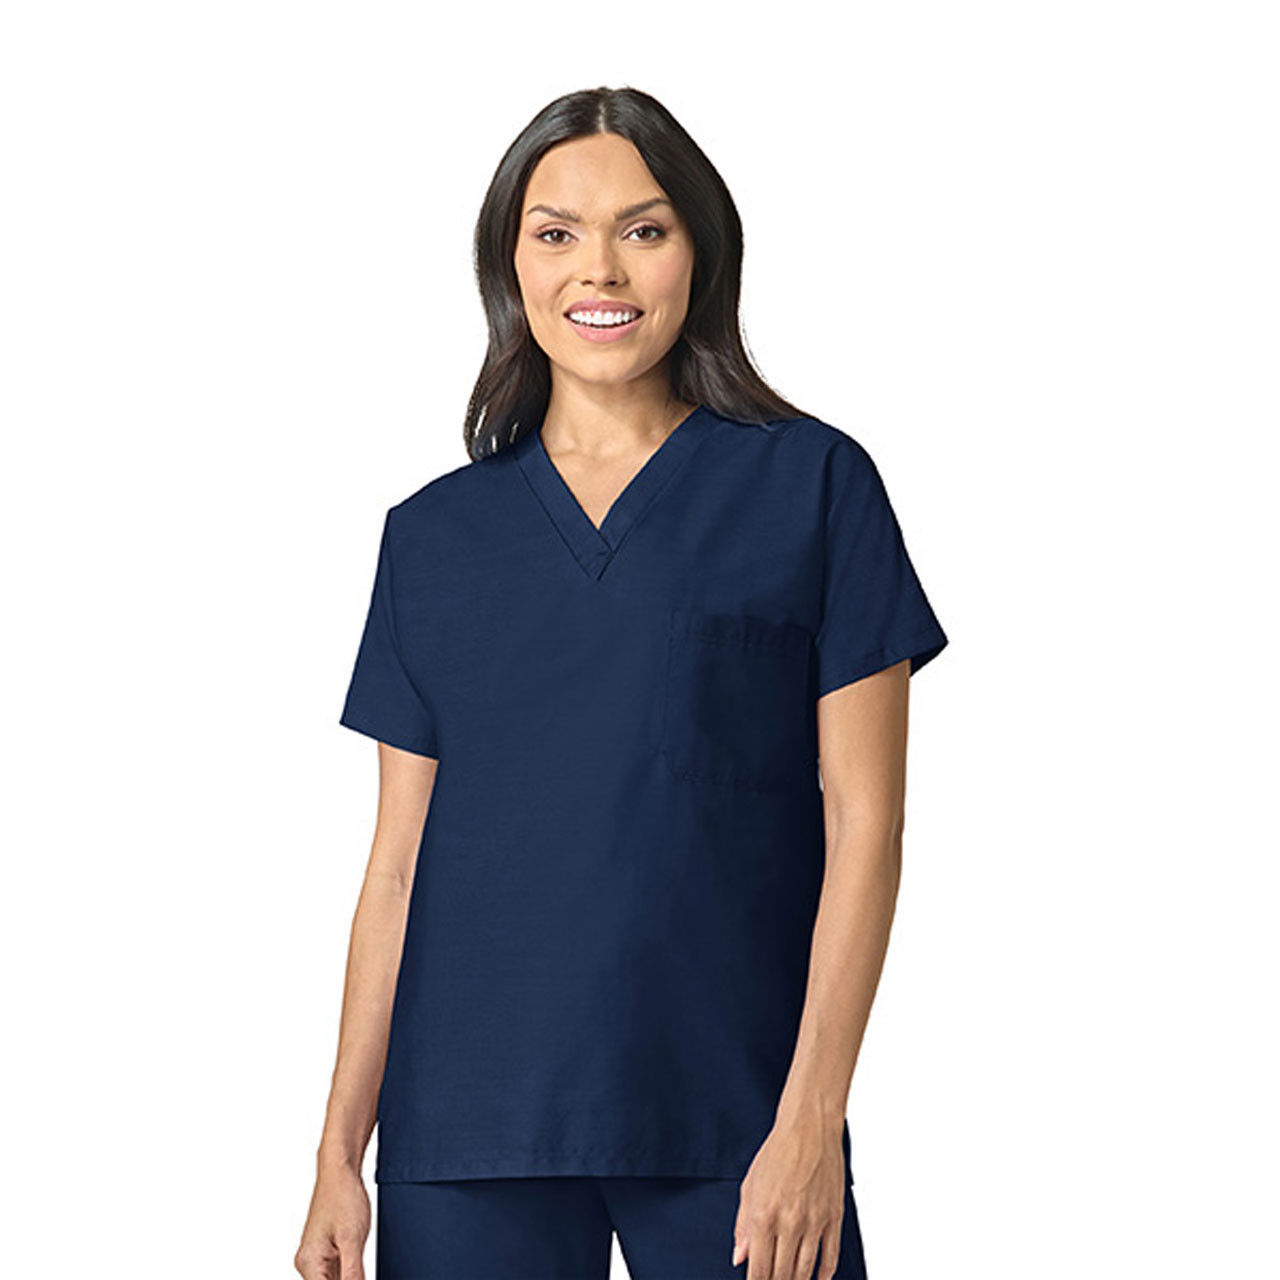 Is the V Neck Scrub Top unisex?